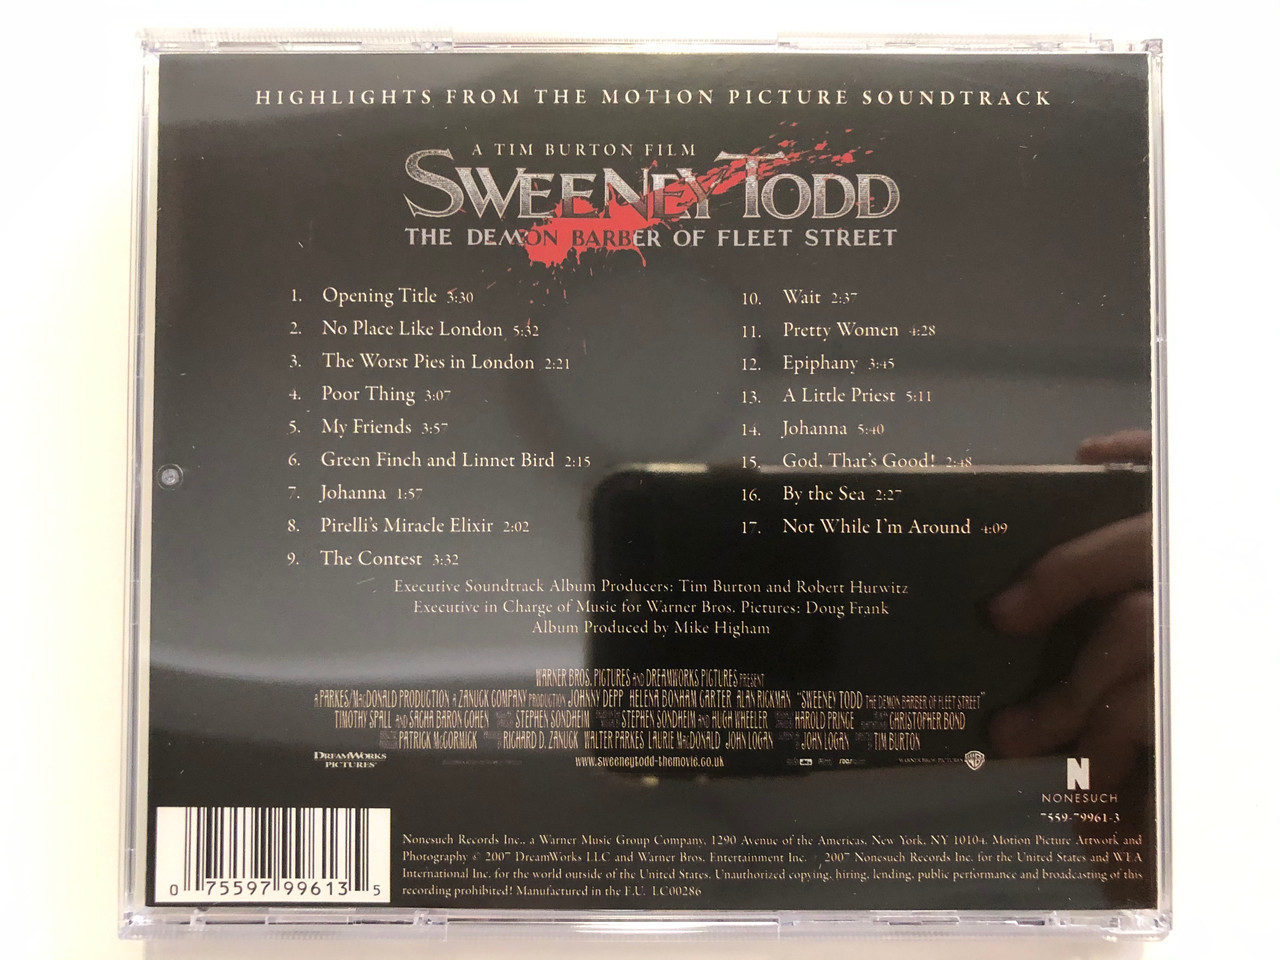 https://cdn10.bigcommerce.com/s-62bdpkt7pb/products/31227/images/183816/Johnny_Depp_Is_Sweeney_Todd_The_Demon_Barber_Of_Fleet_Street_Highlights_From_The_Motion_Picture_Soundtrack_Nonesuch_Audio_CD_2007_7559-79961-3_7__71851.1625740657.1280.1280.JPG?c=2